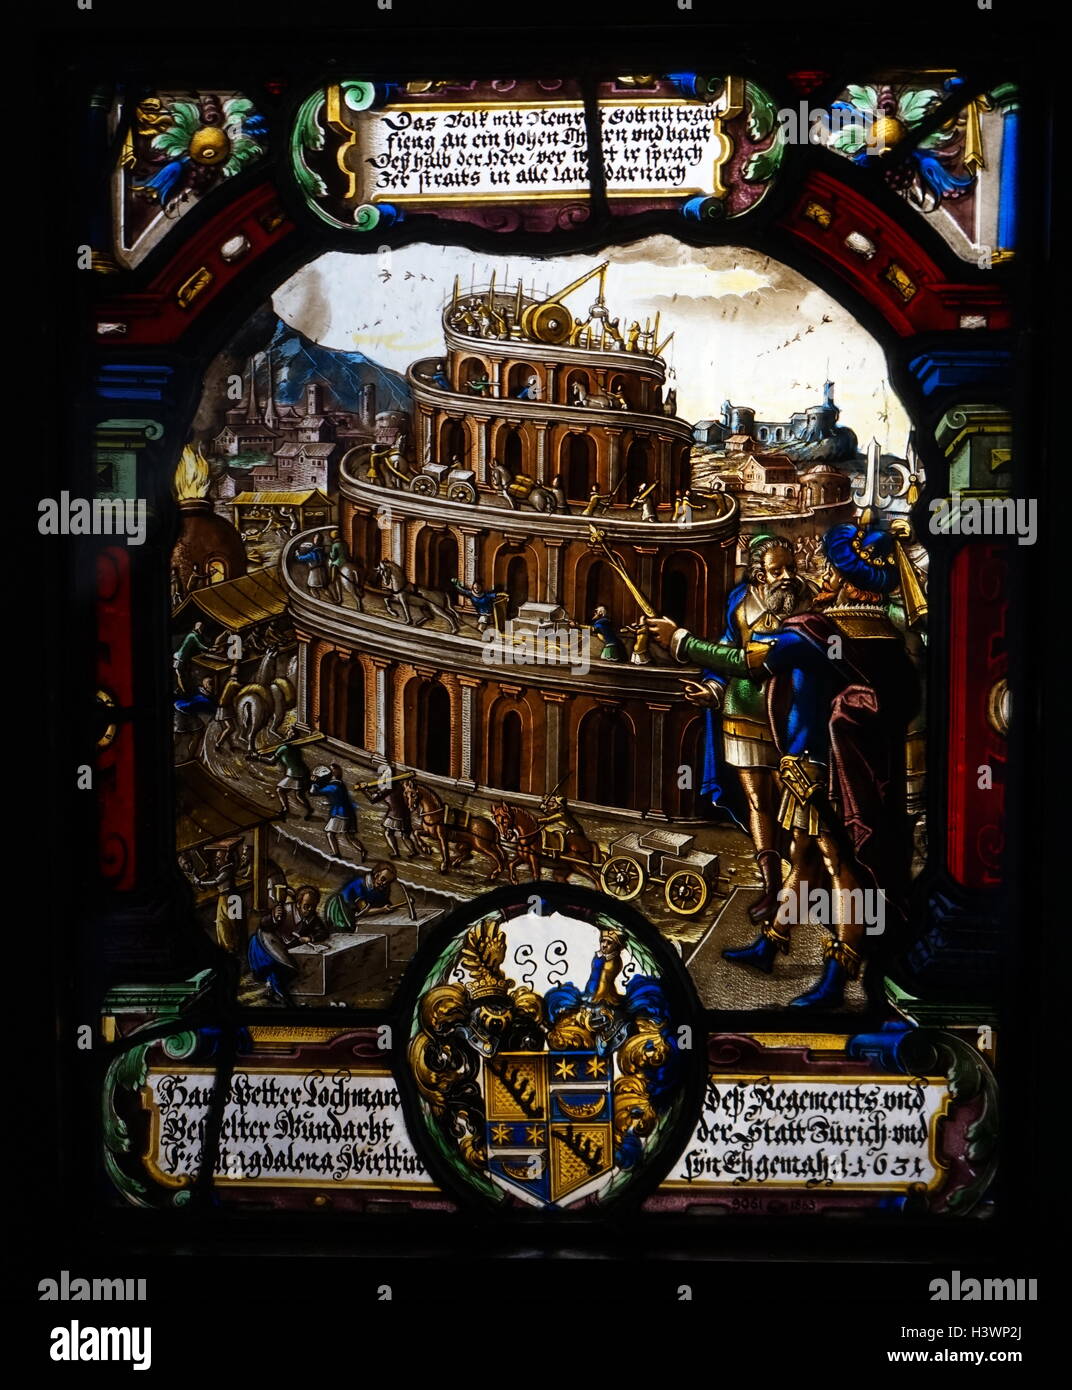 Stained glass window depicting Saint Paul converting to Christianity after he was struck down on his way to Damascus. Dated 17th Century Stock Photo